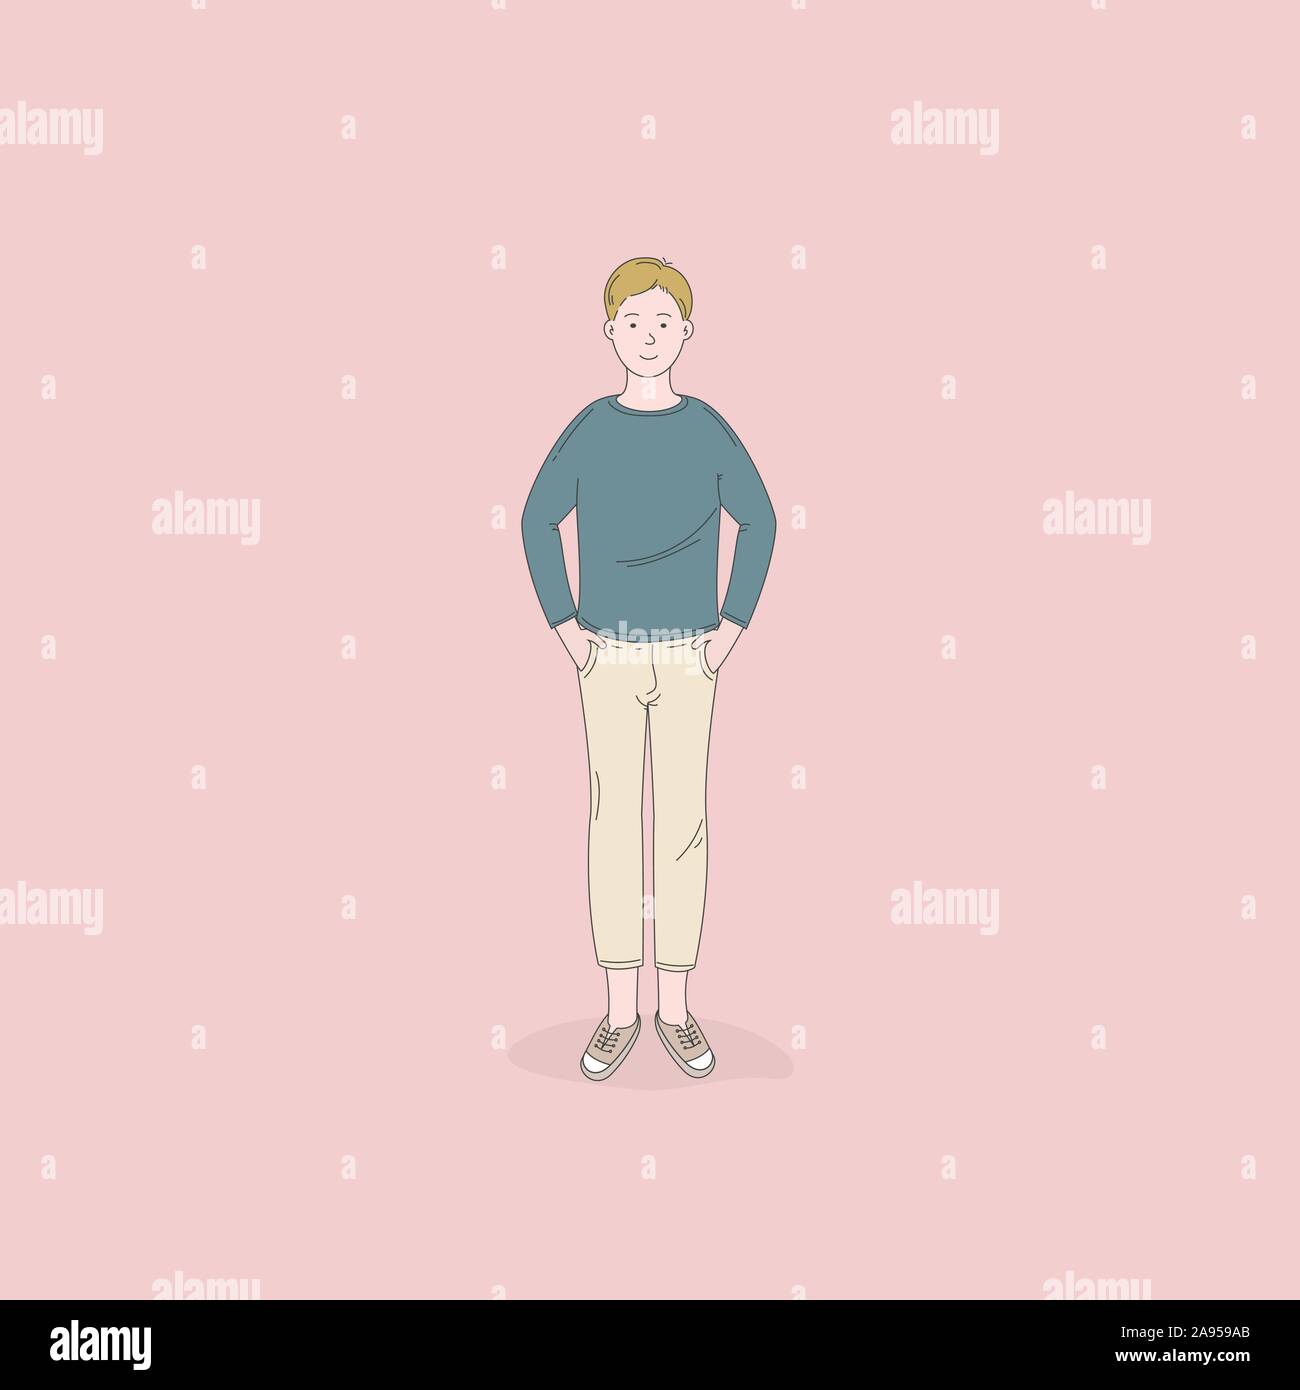 The man standing poses isolated on background.Lifestyle concepts.Vector design illustrations. Stock Vector